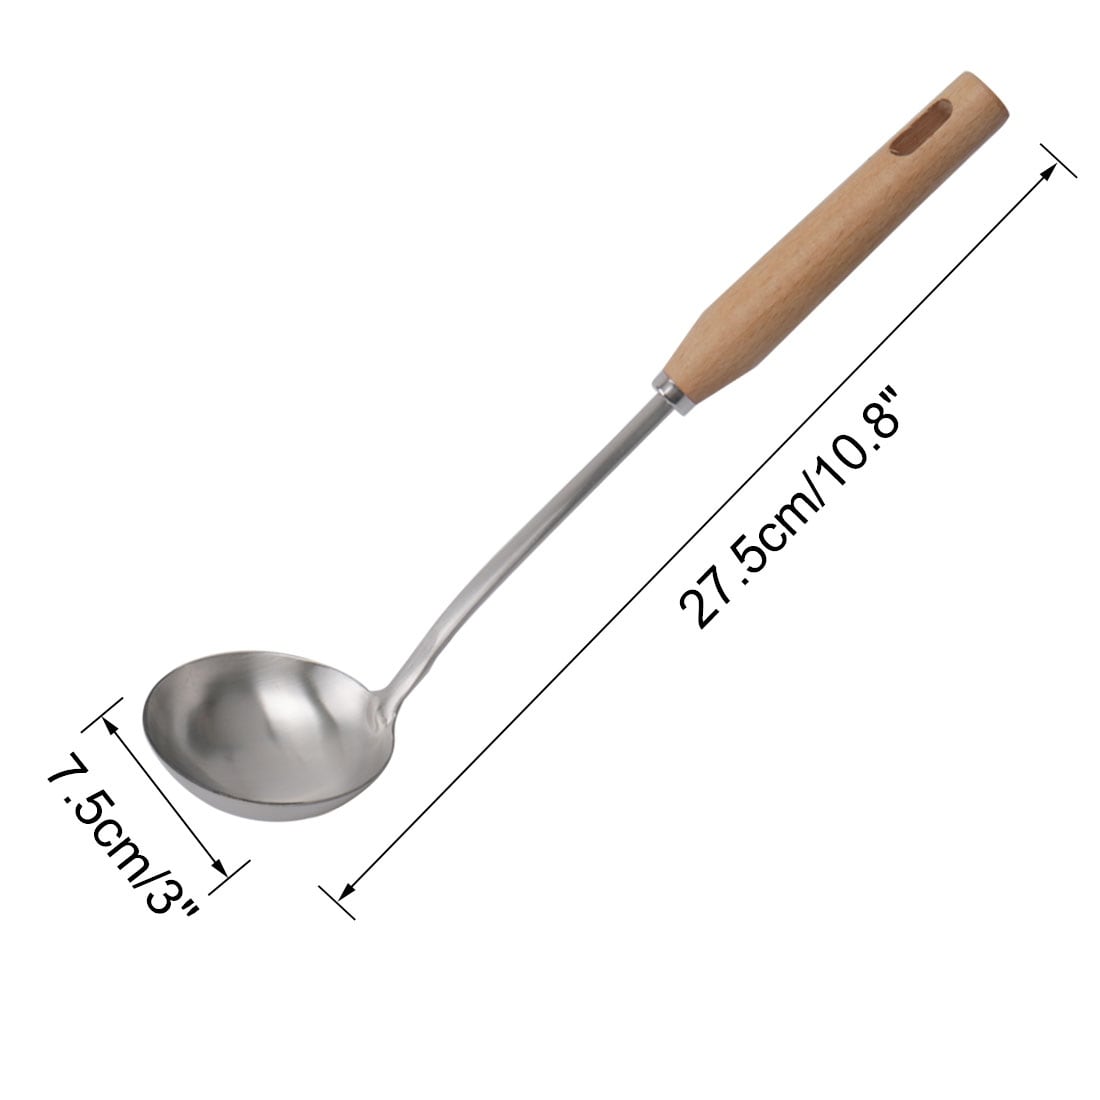 https://ak1.ostkcdn.com/images/products/is/images/direct/4de5e91926efadb0171463904ab52abc055a7c65/Stainless-Steel-Soup-Ladle-Spoon-Wooden-Handle-Cookware-Utensil.jpg